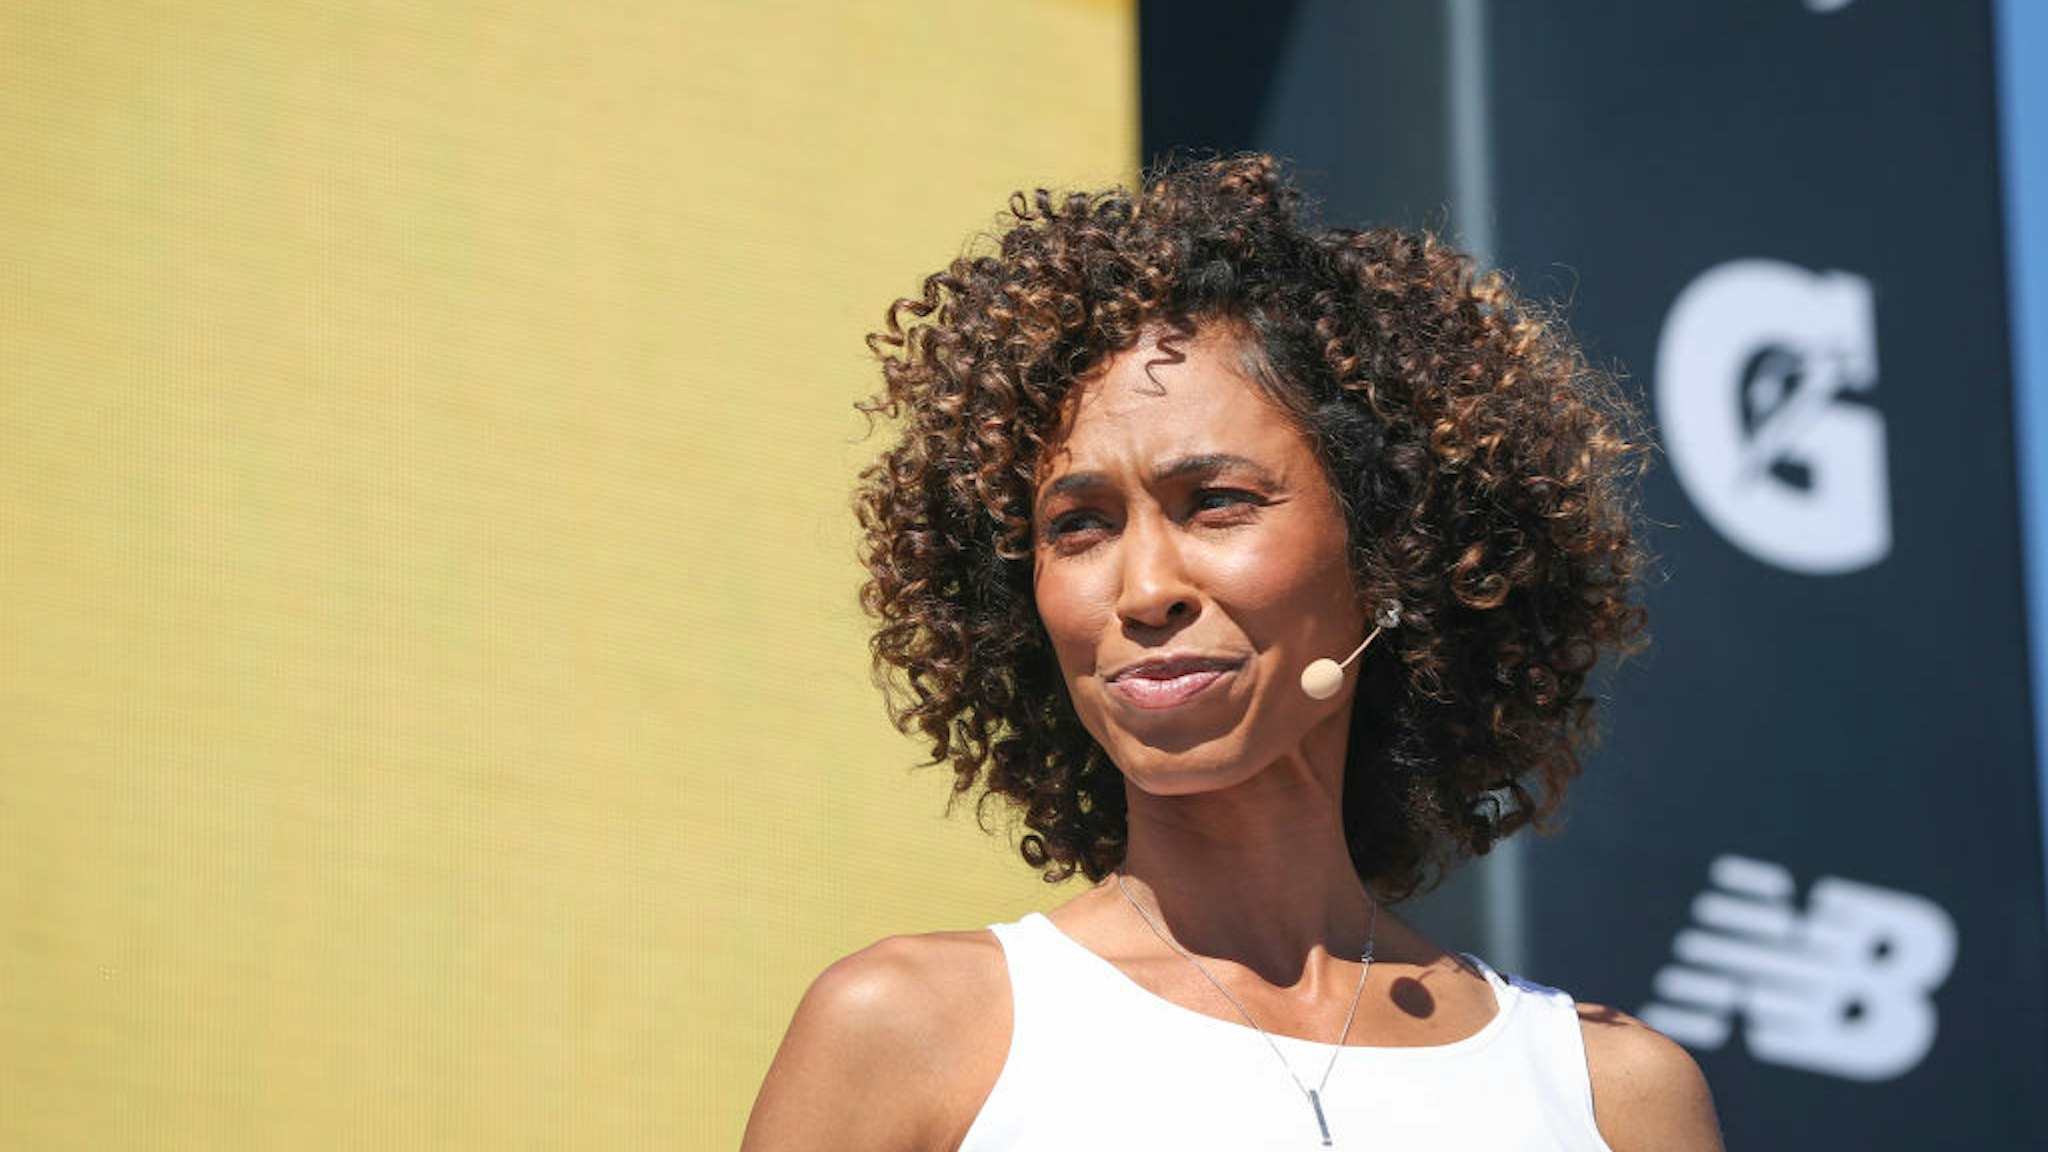 NEWPORT BEACH, CALIFORNIA - OCTOBER 23: SportsCenter anchor Sage Steele at the espnW Women + Sports Summit held at The Resort at Pelican Hill on October 23, 2019 in Newport Beach, California. (Photo by Meg Oliphant/Getty Images)